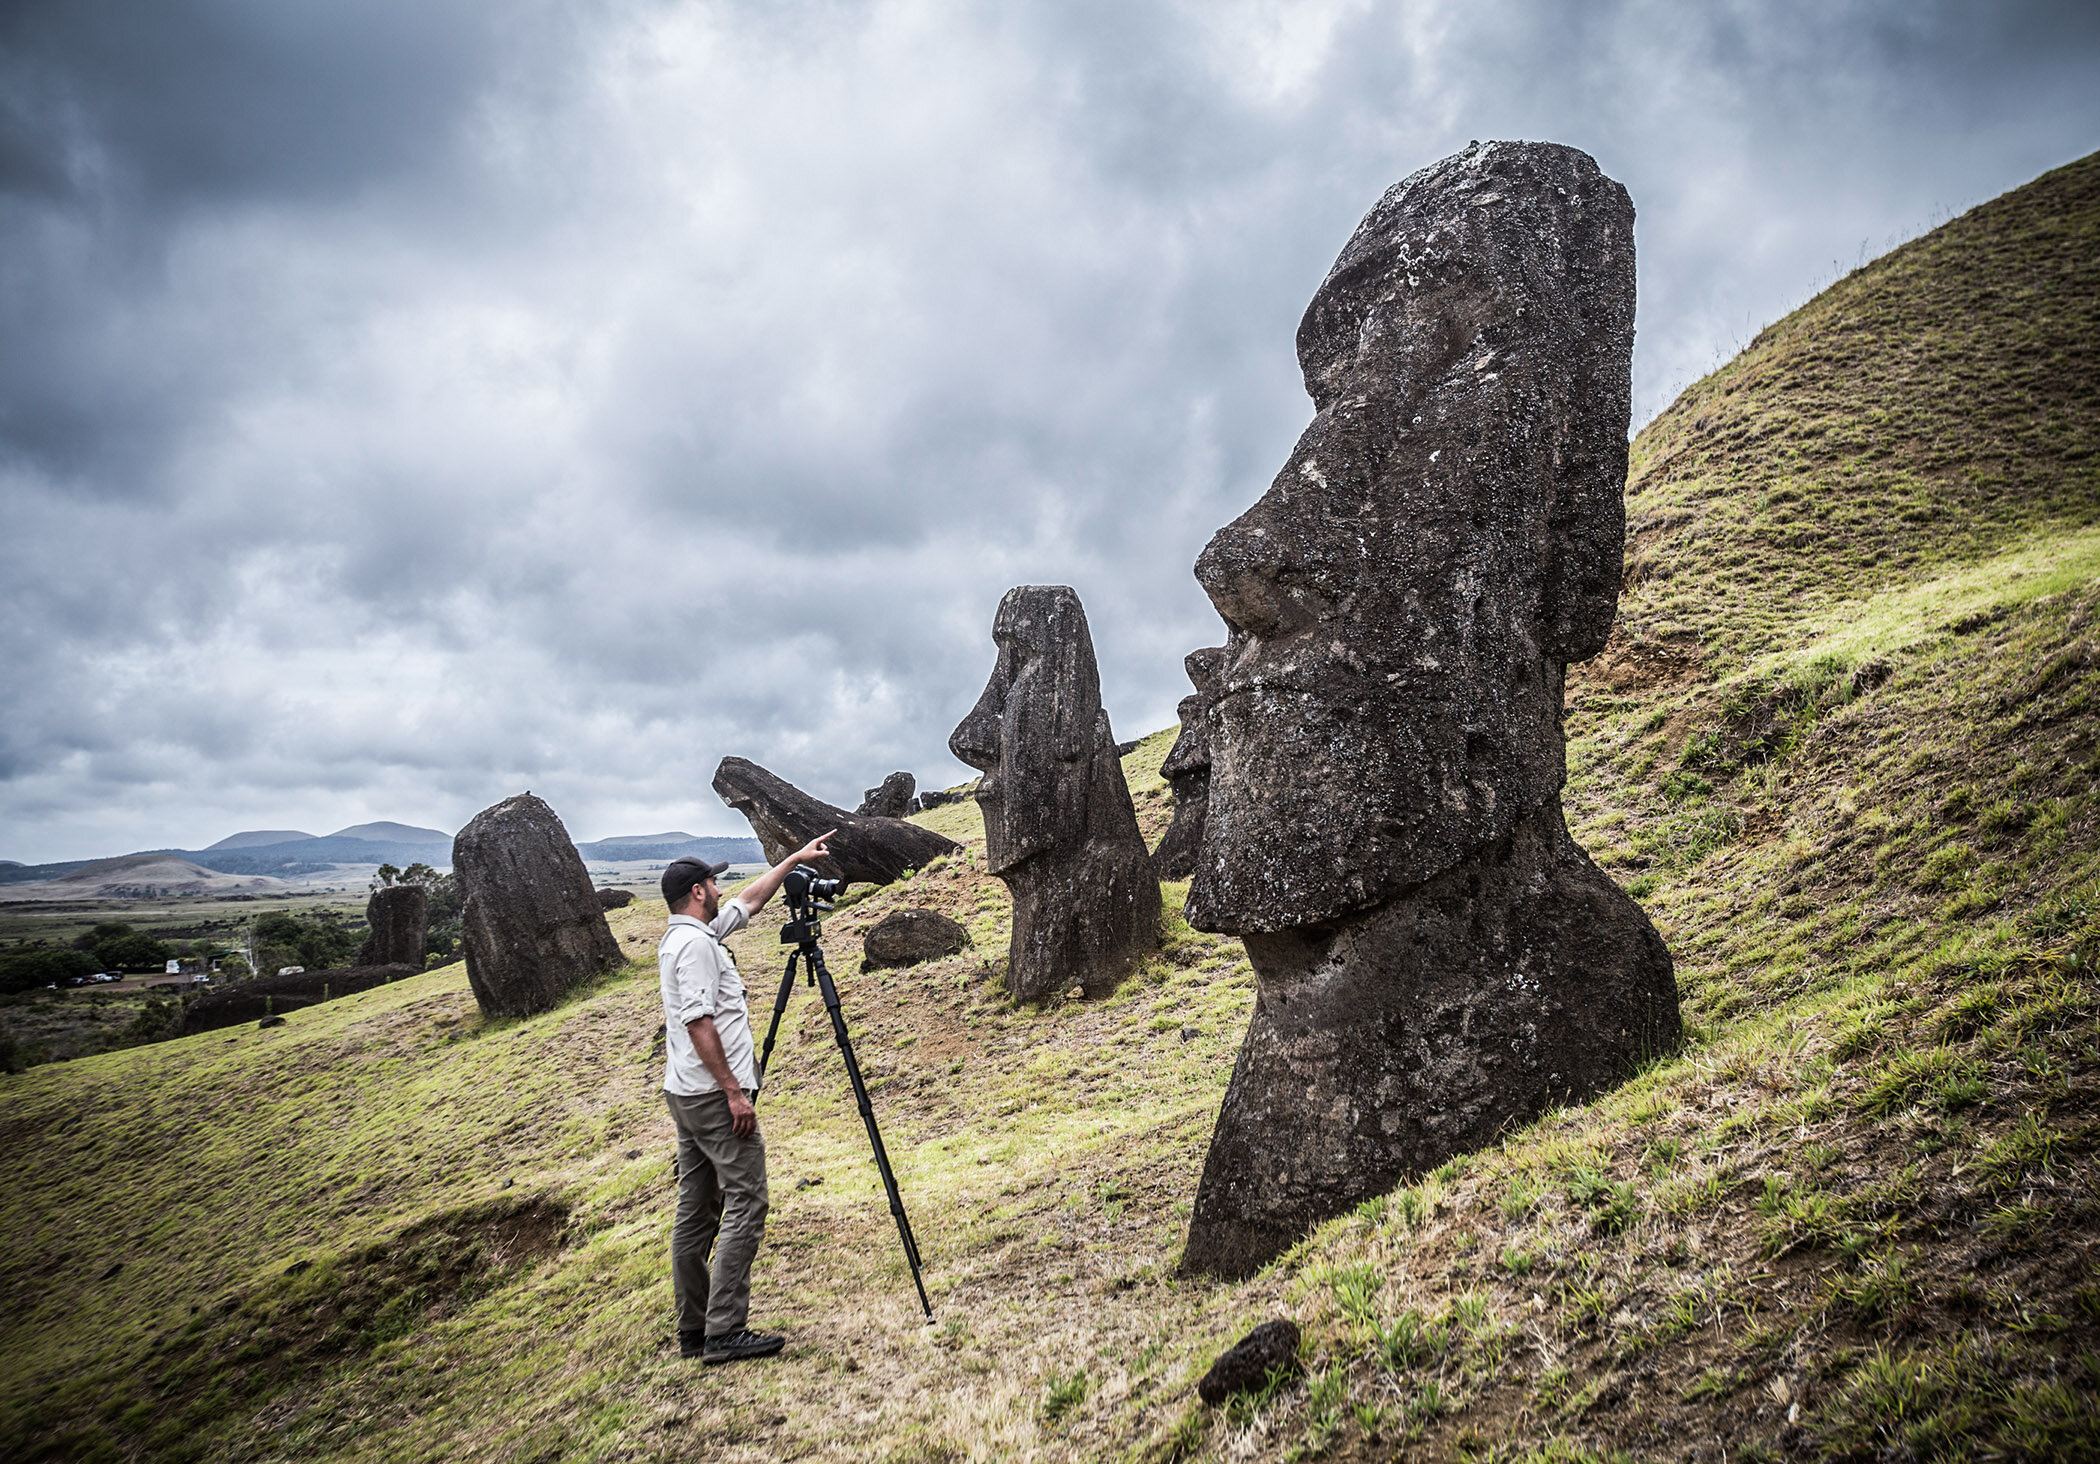  Documenting the quarry area of Rano Raraku where the majority of the islands statues were carved from volcanic tuff.  